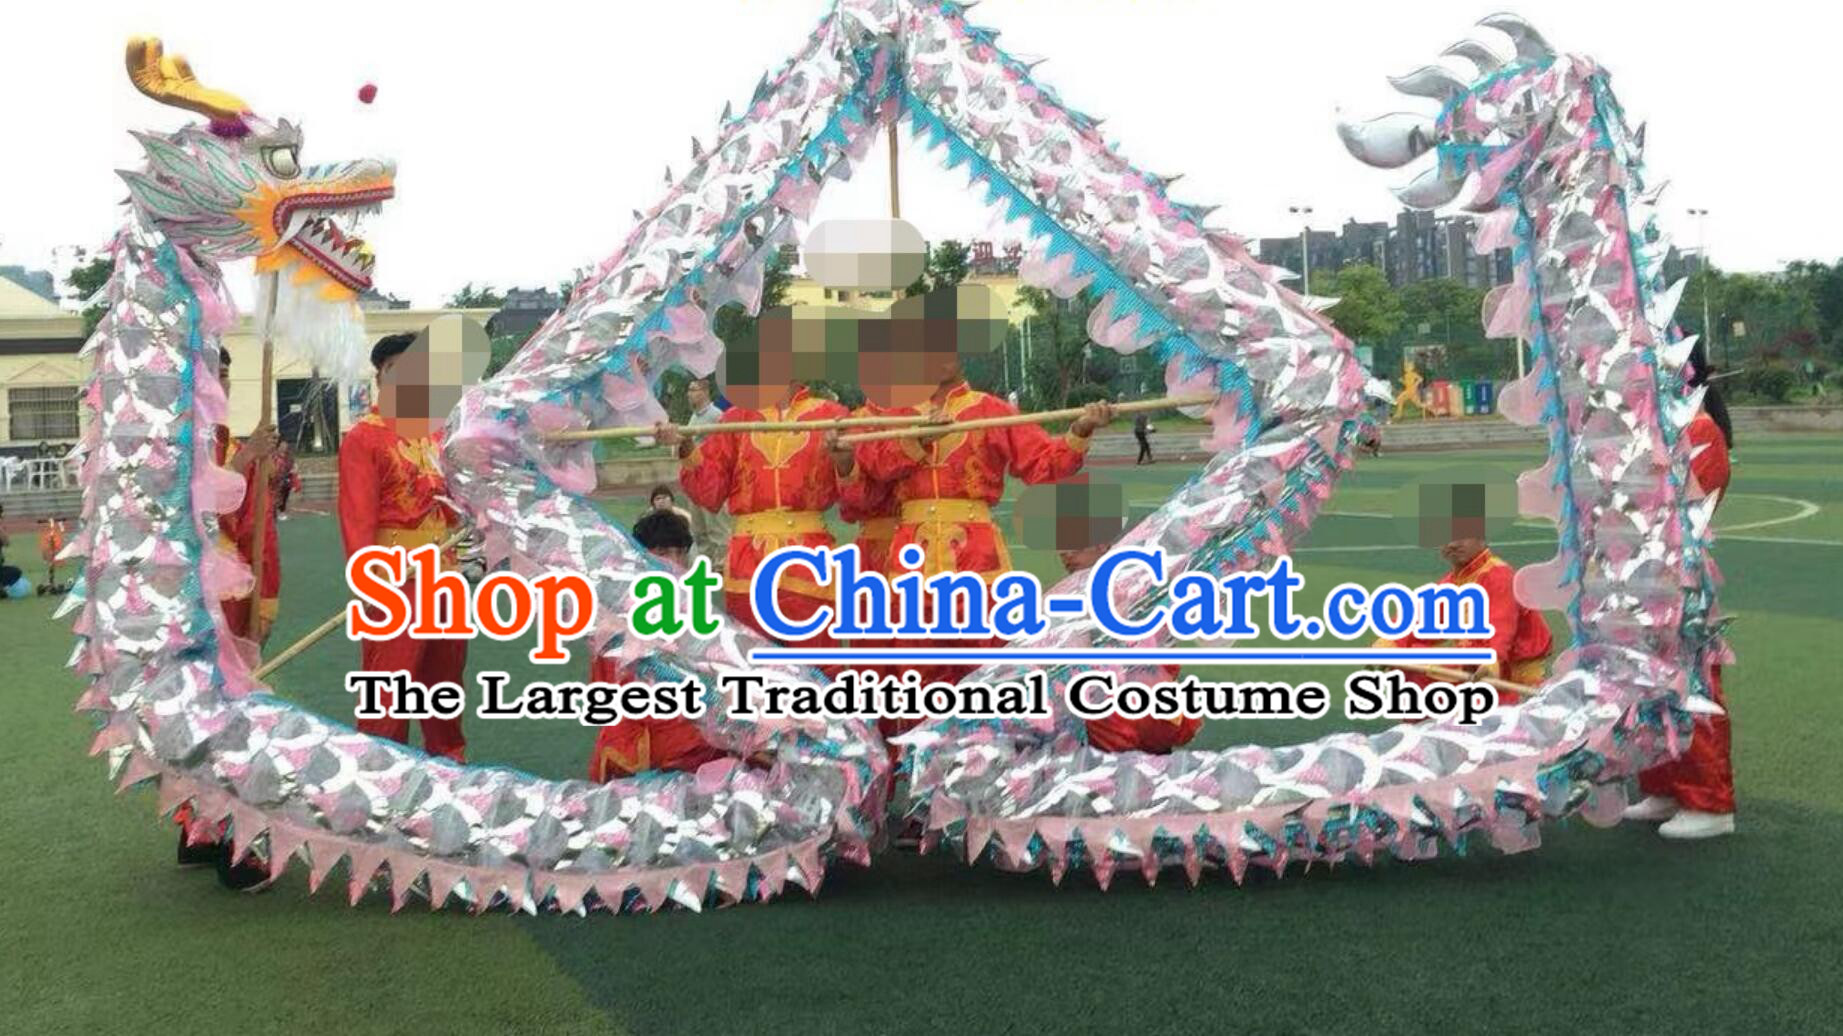 Chinese Dragon Dance Argent Net Costume Celebration Parade Dragon Costume Professional Competition Dragon Dancing Prop